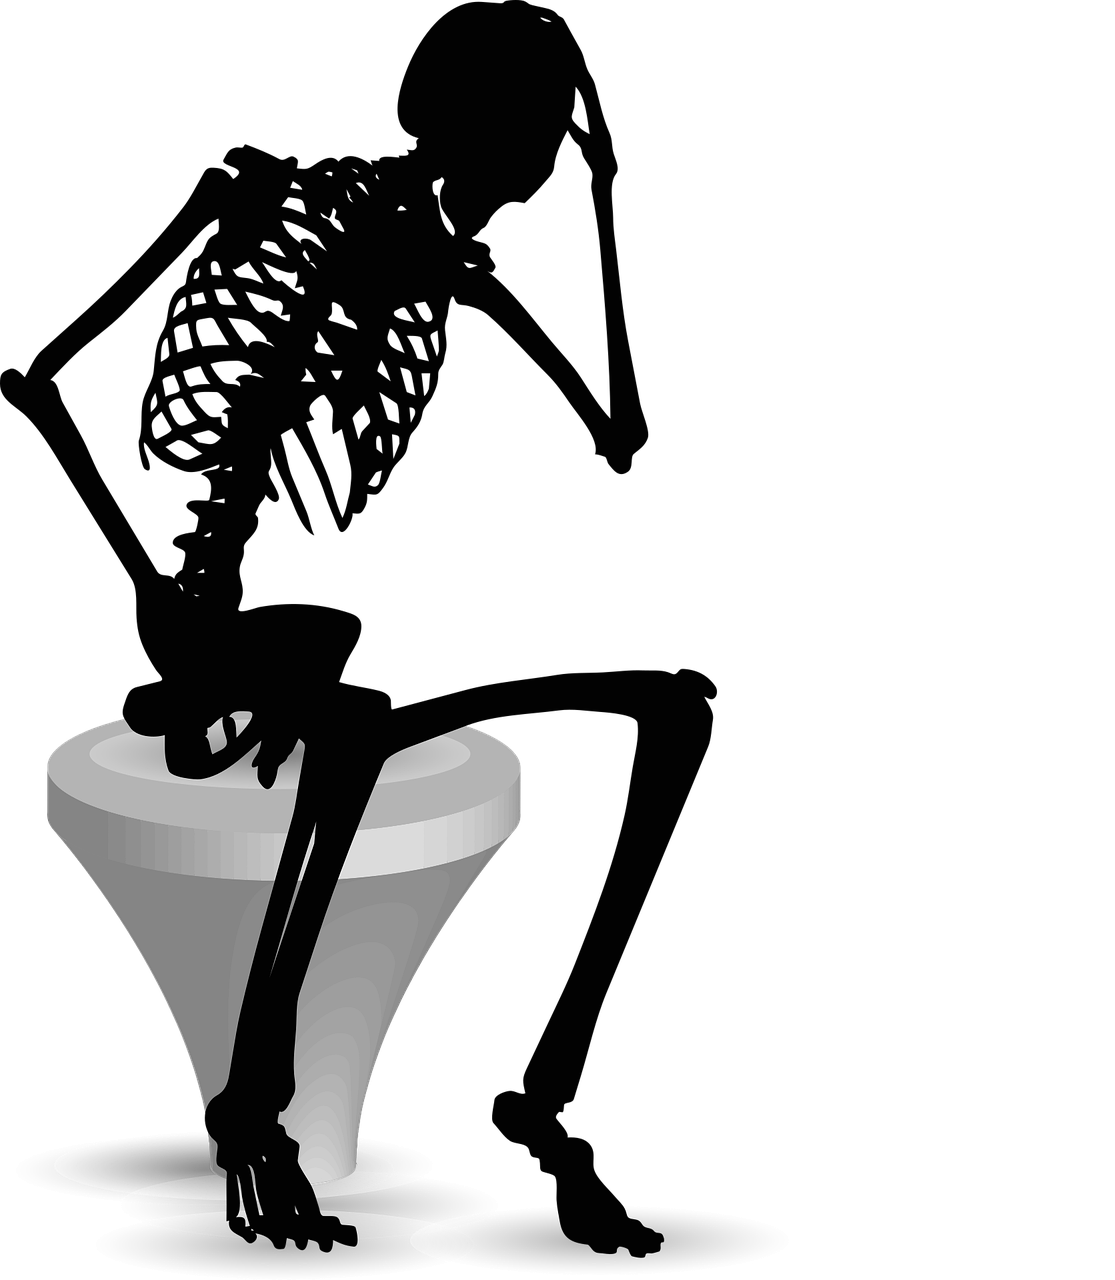 a black and white photo of a person sitting on a toilet, a raytraced image, pixabay contest winner, conceptual art, cup of death, black backround. inkscape, wallpaper - 1 0 2 4, upsidedown